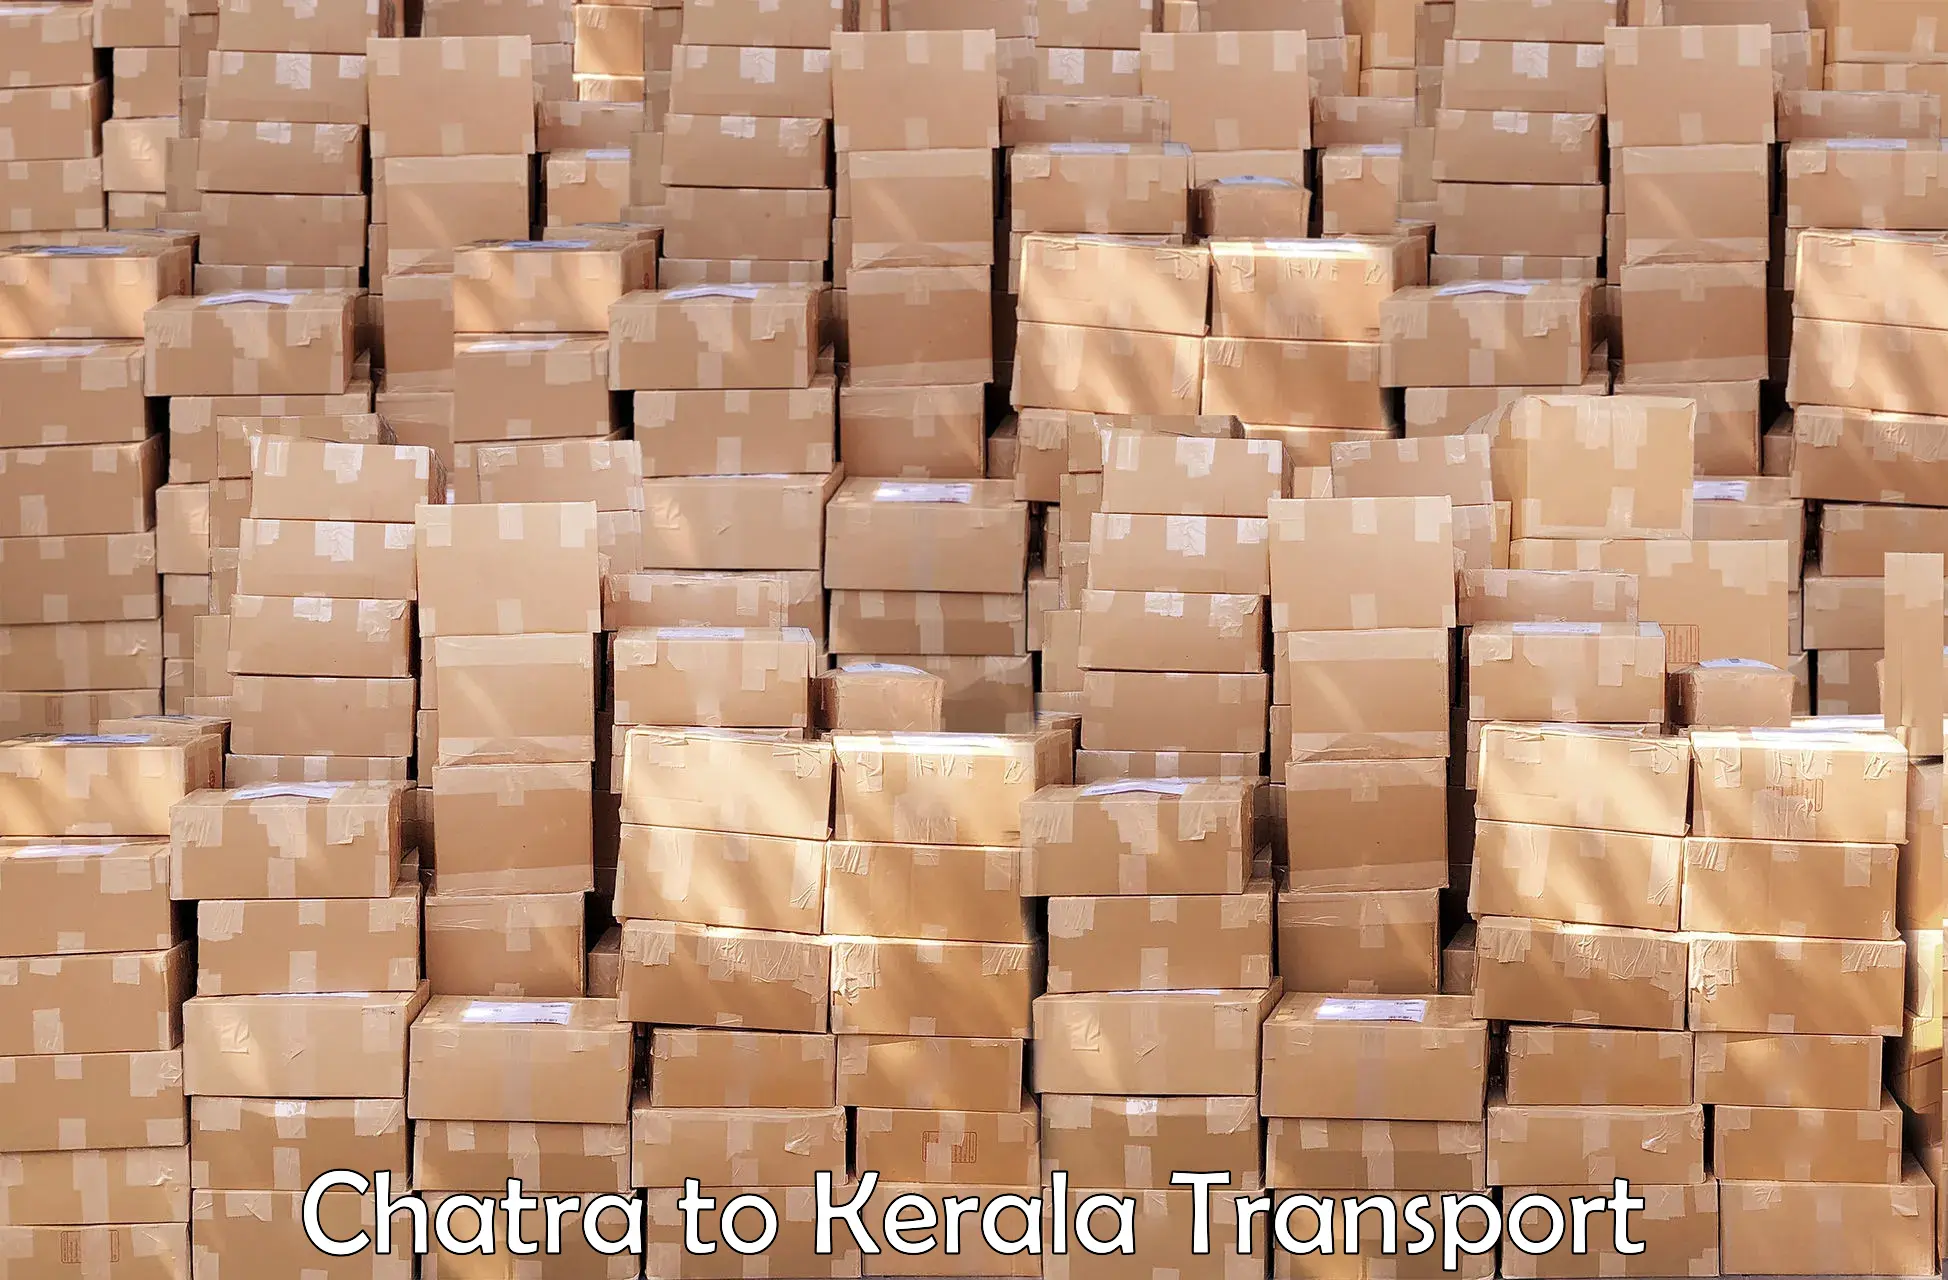 Pick up transport service in Chatra to Kottayam